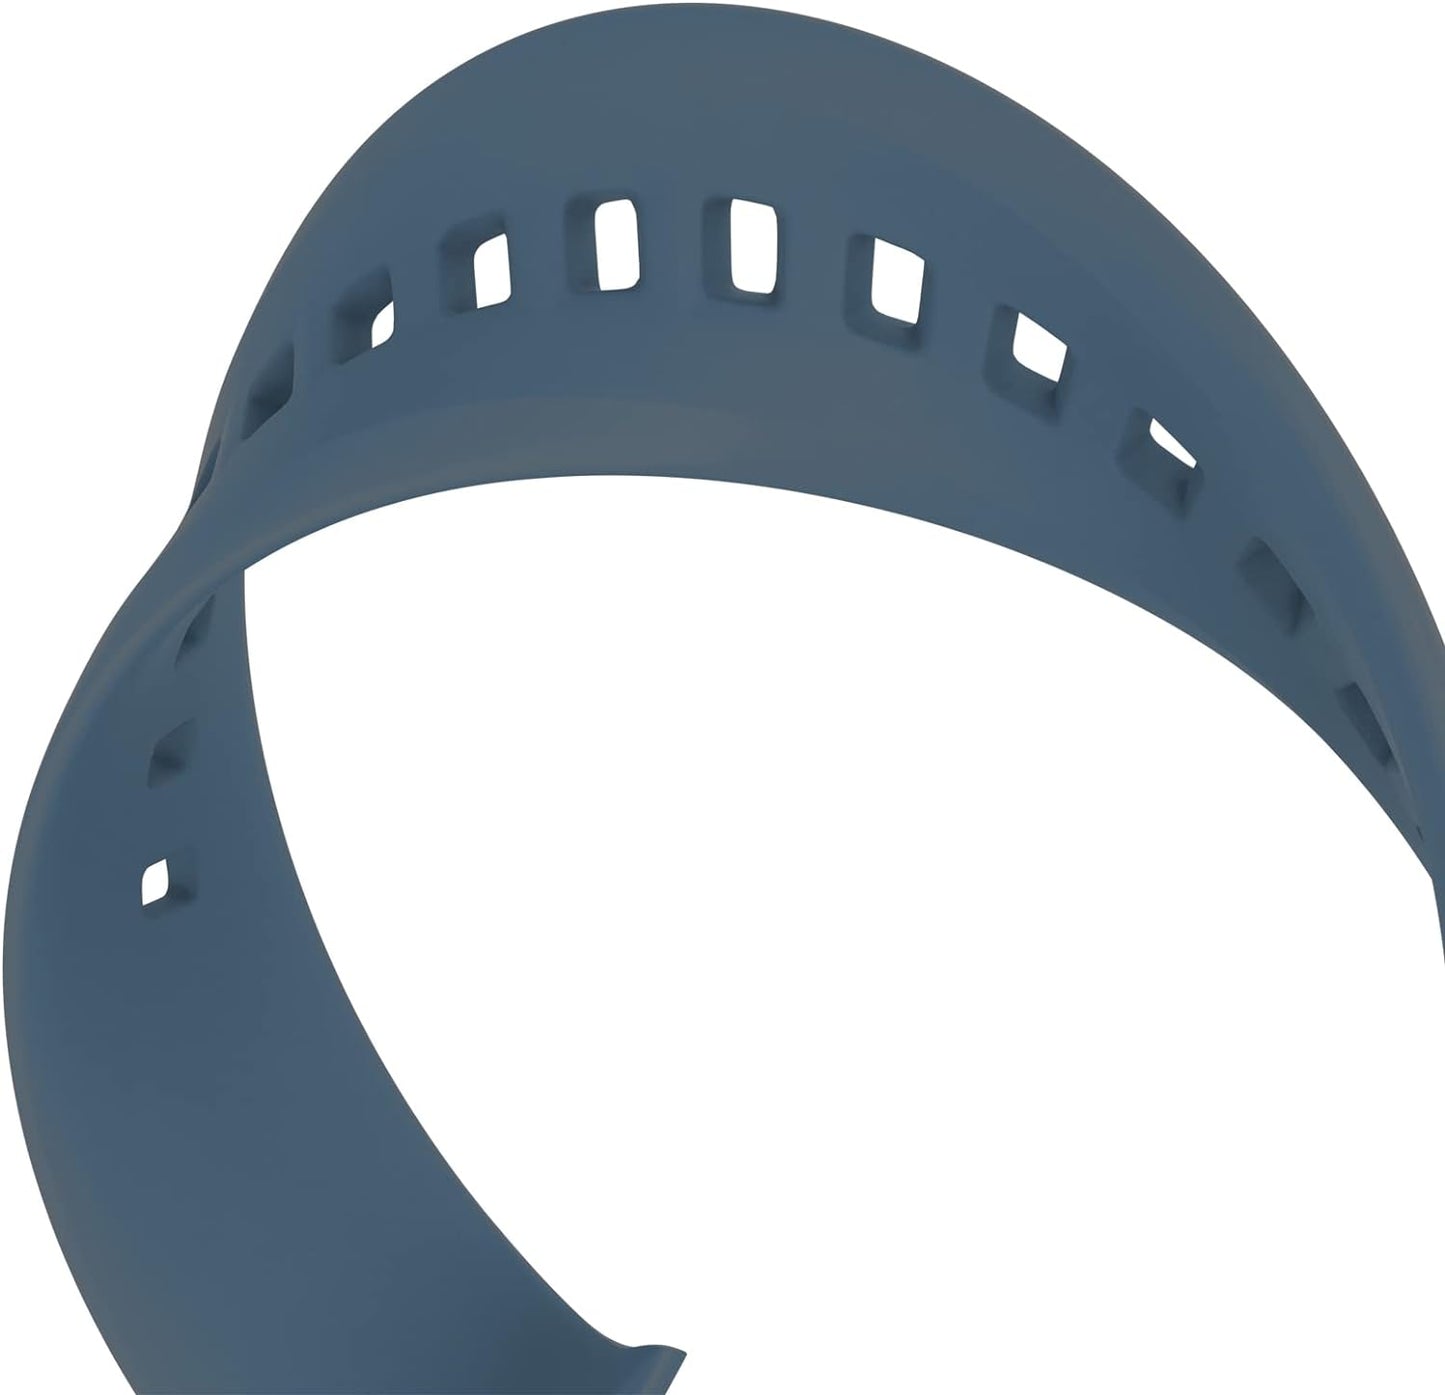 BingoFit Replacement Wristband for FT816 Fitness Tracker